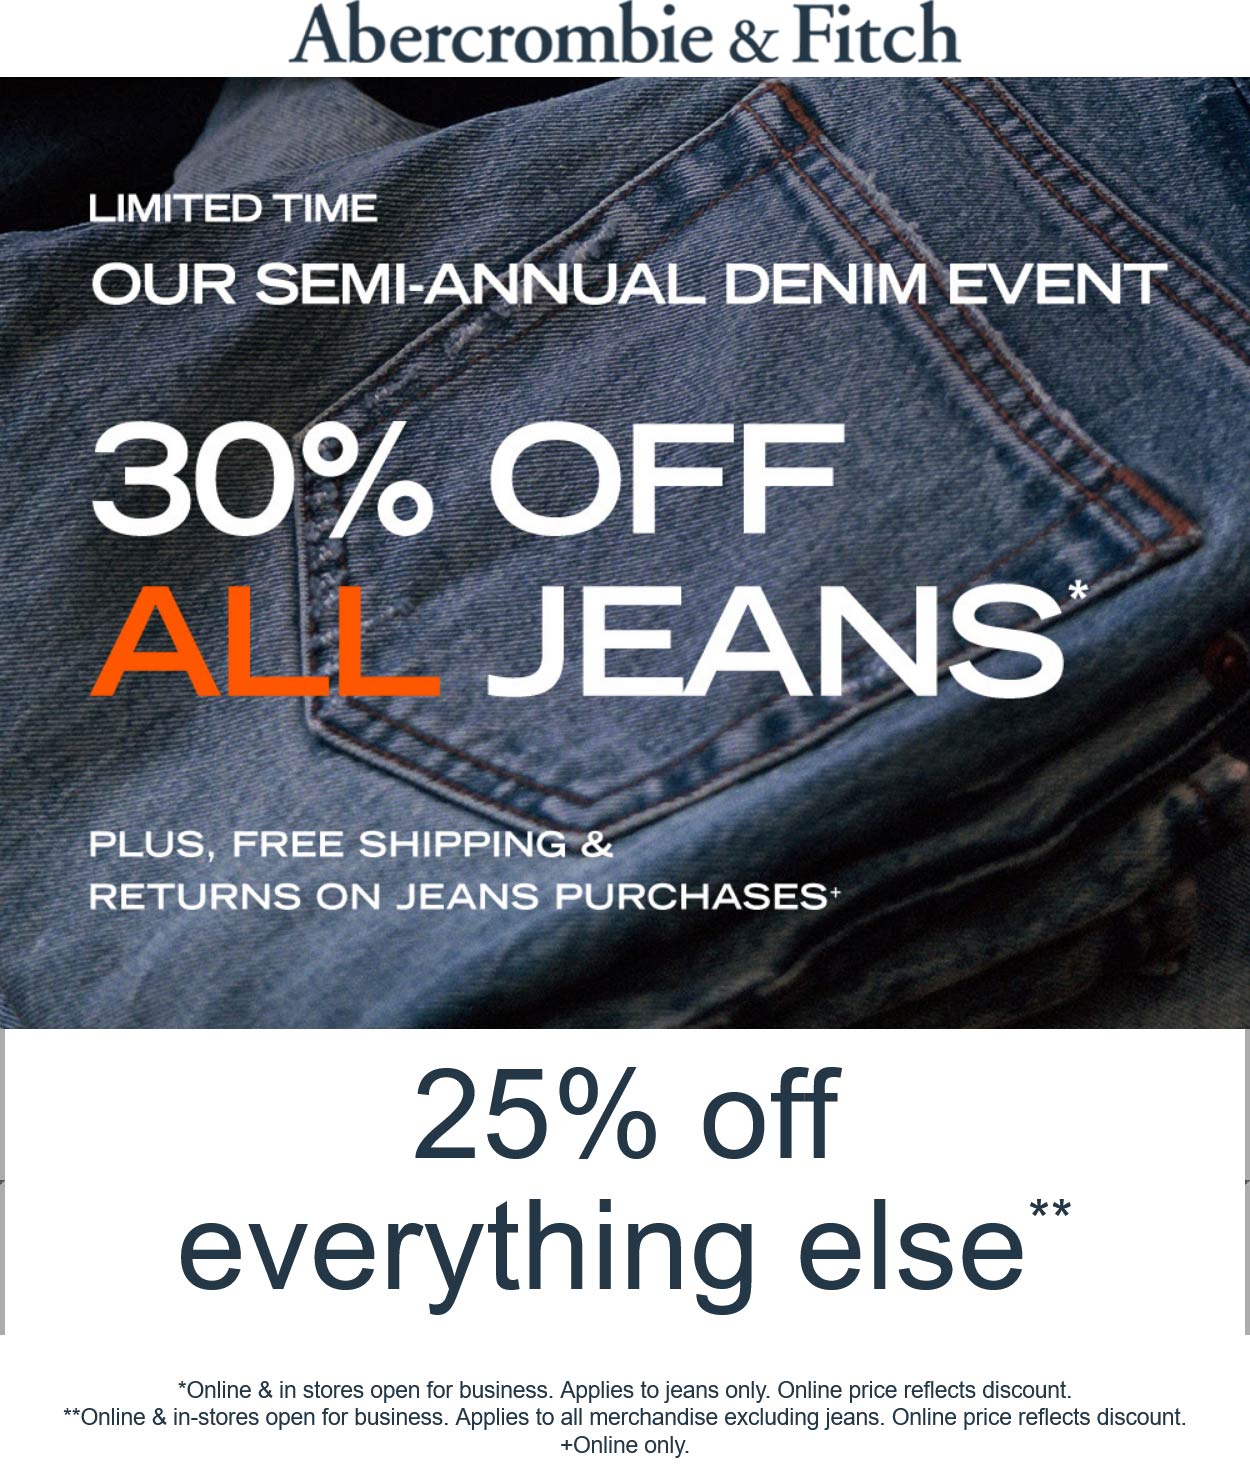 Abercrombie & Fitch stores Coupon  30% off all jeans & 25% off everything else at Abercrombie & Fitch, ditto online #abercrombiefitch 